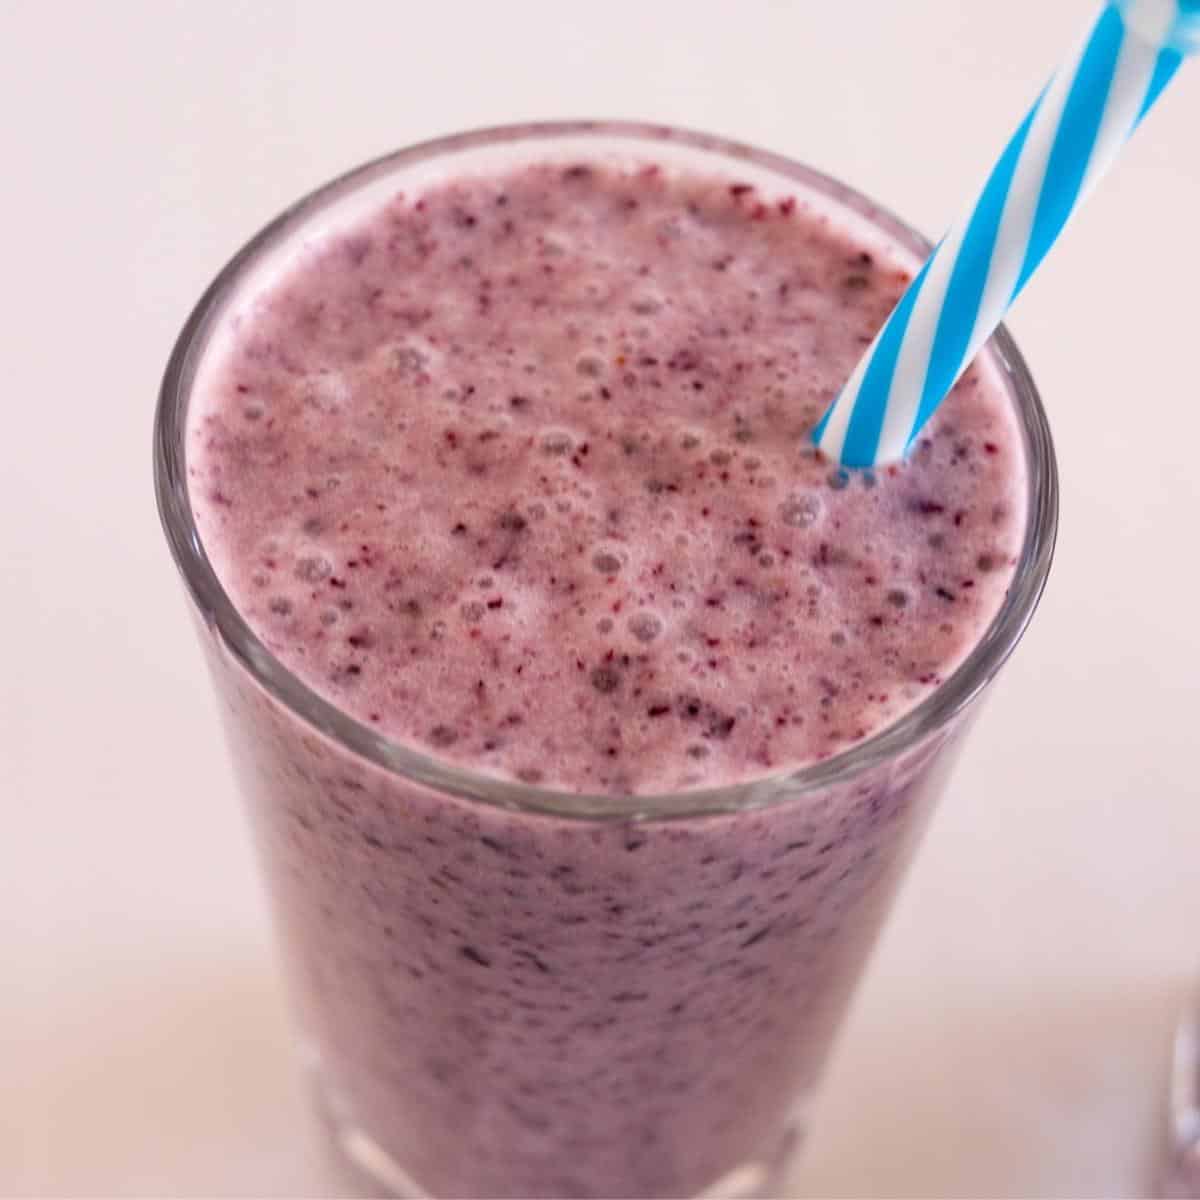 A glass of blueberry banana smoothie.